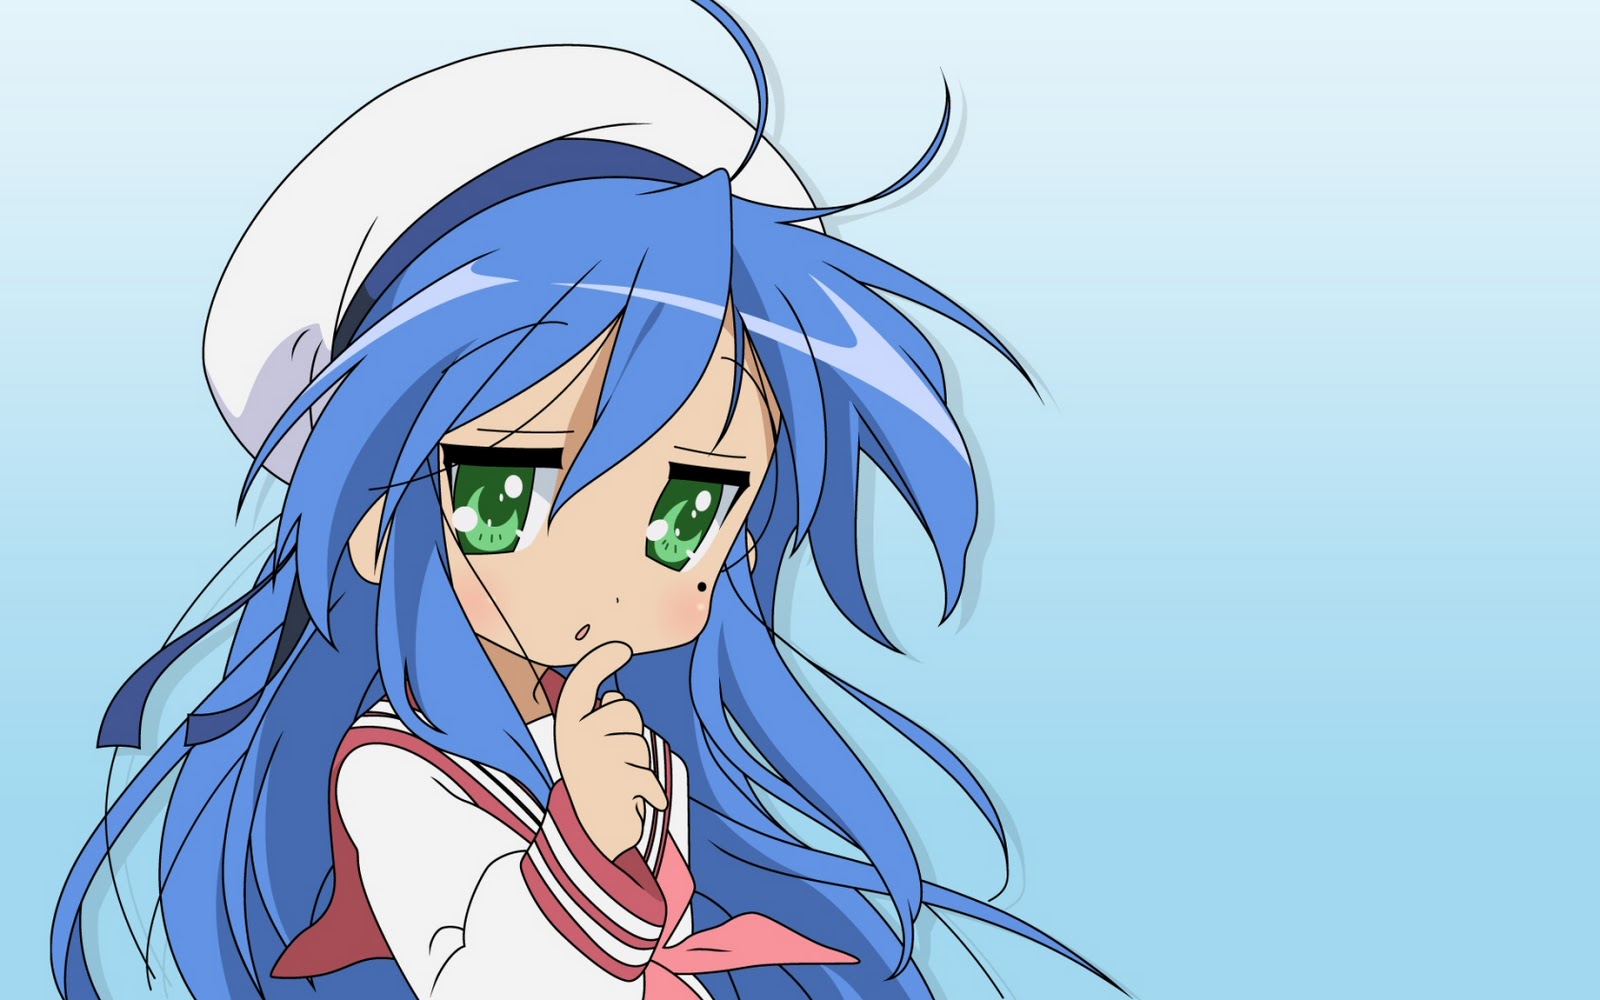 Lucky Star picture 2.